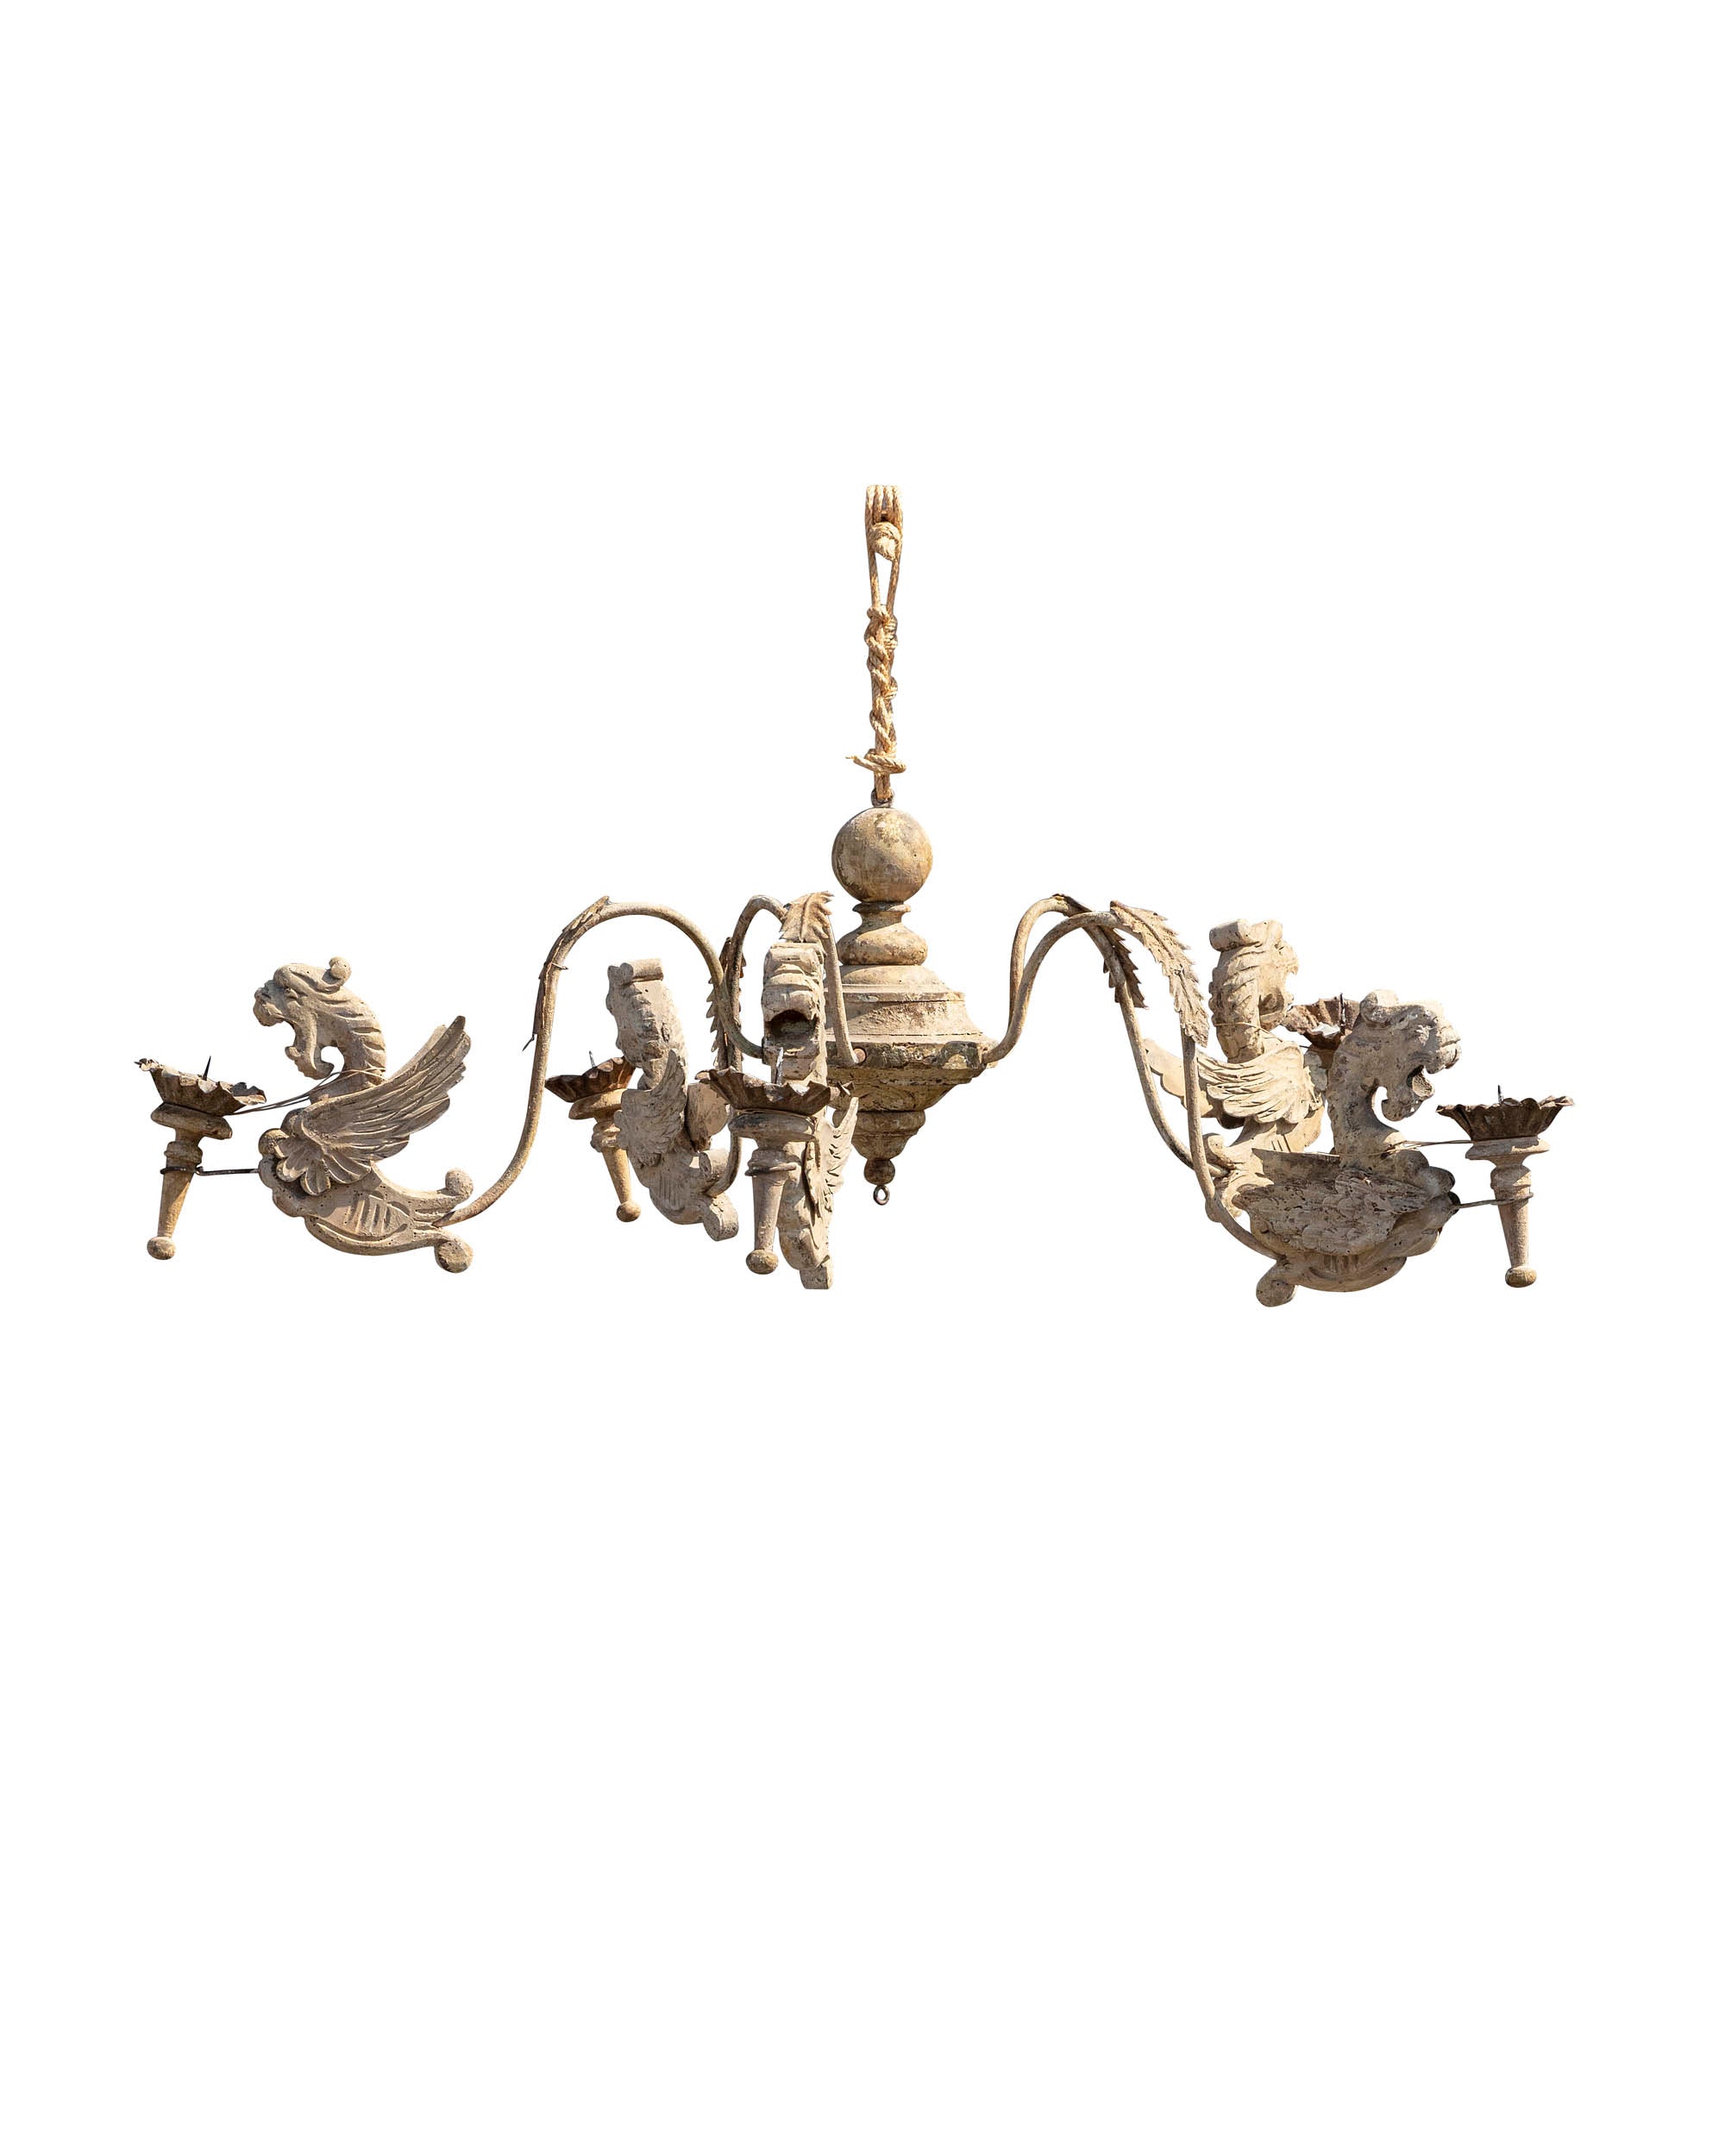 Ceiling lamp formed by five wrought-iron candle-holders with winged dragons